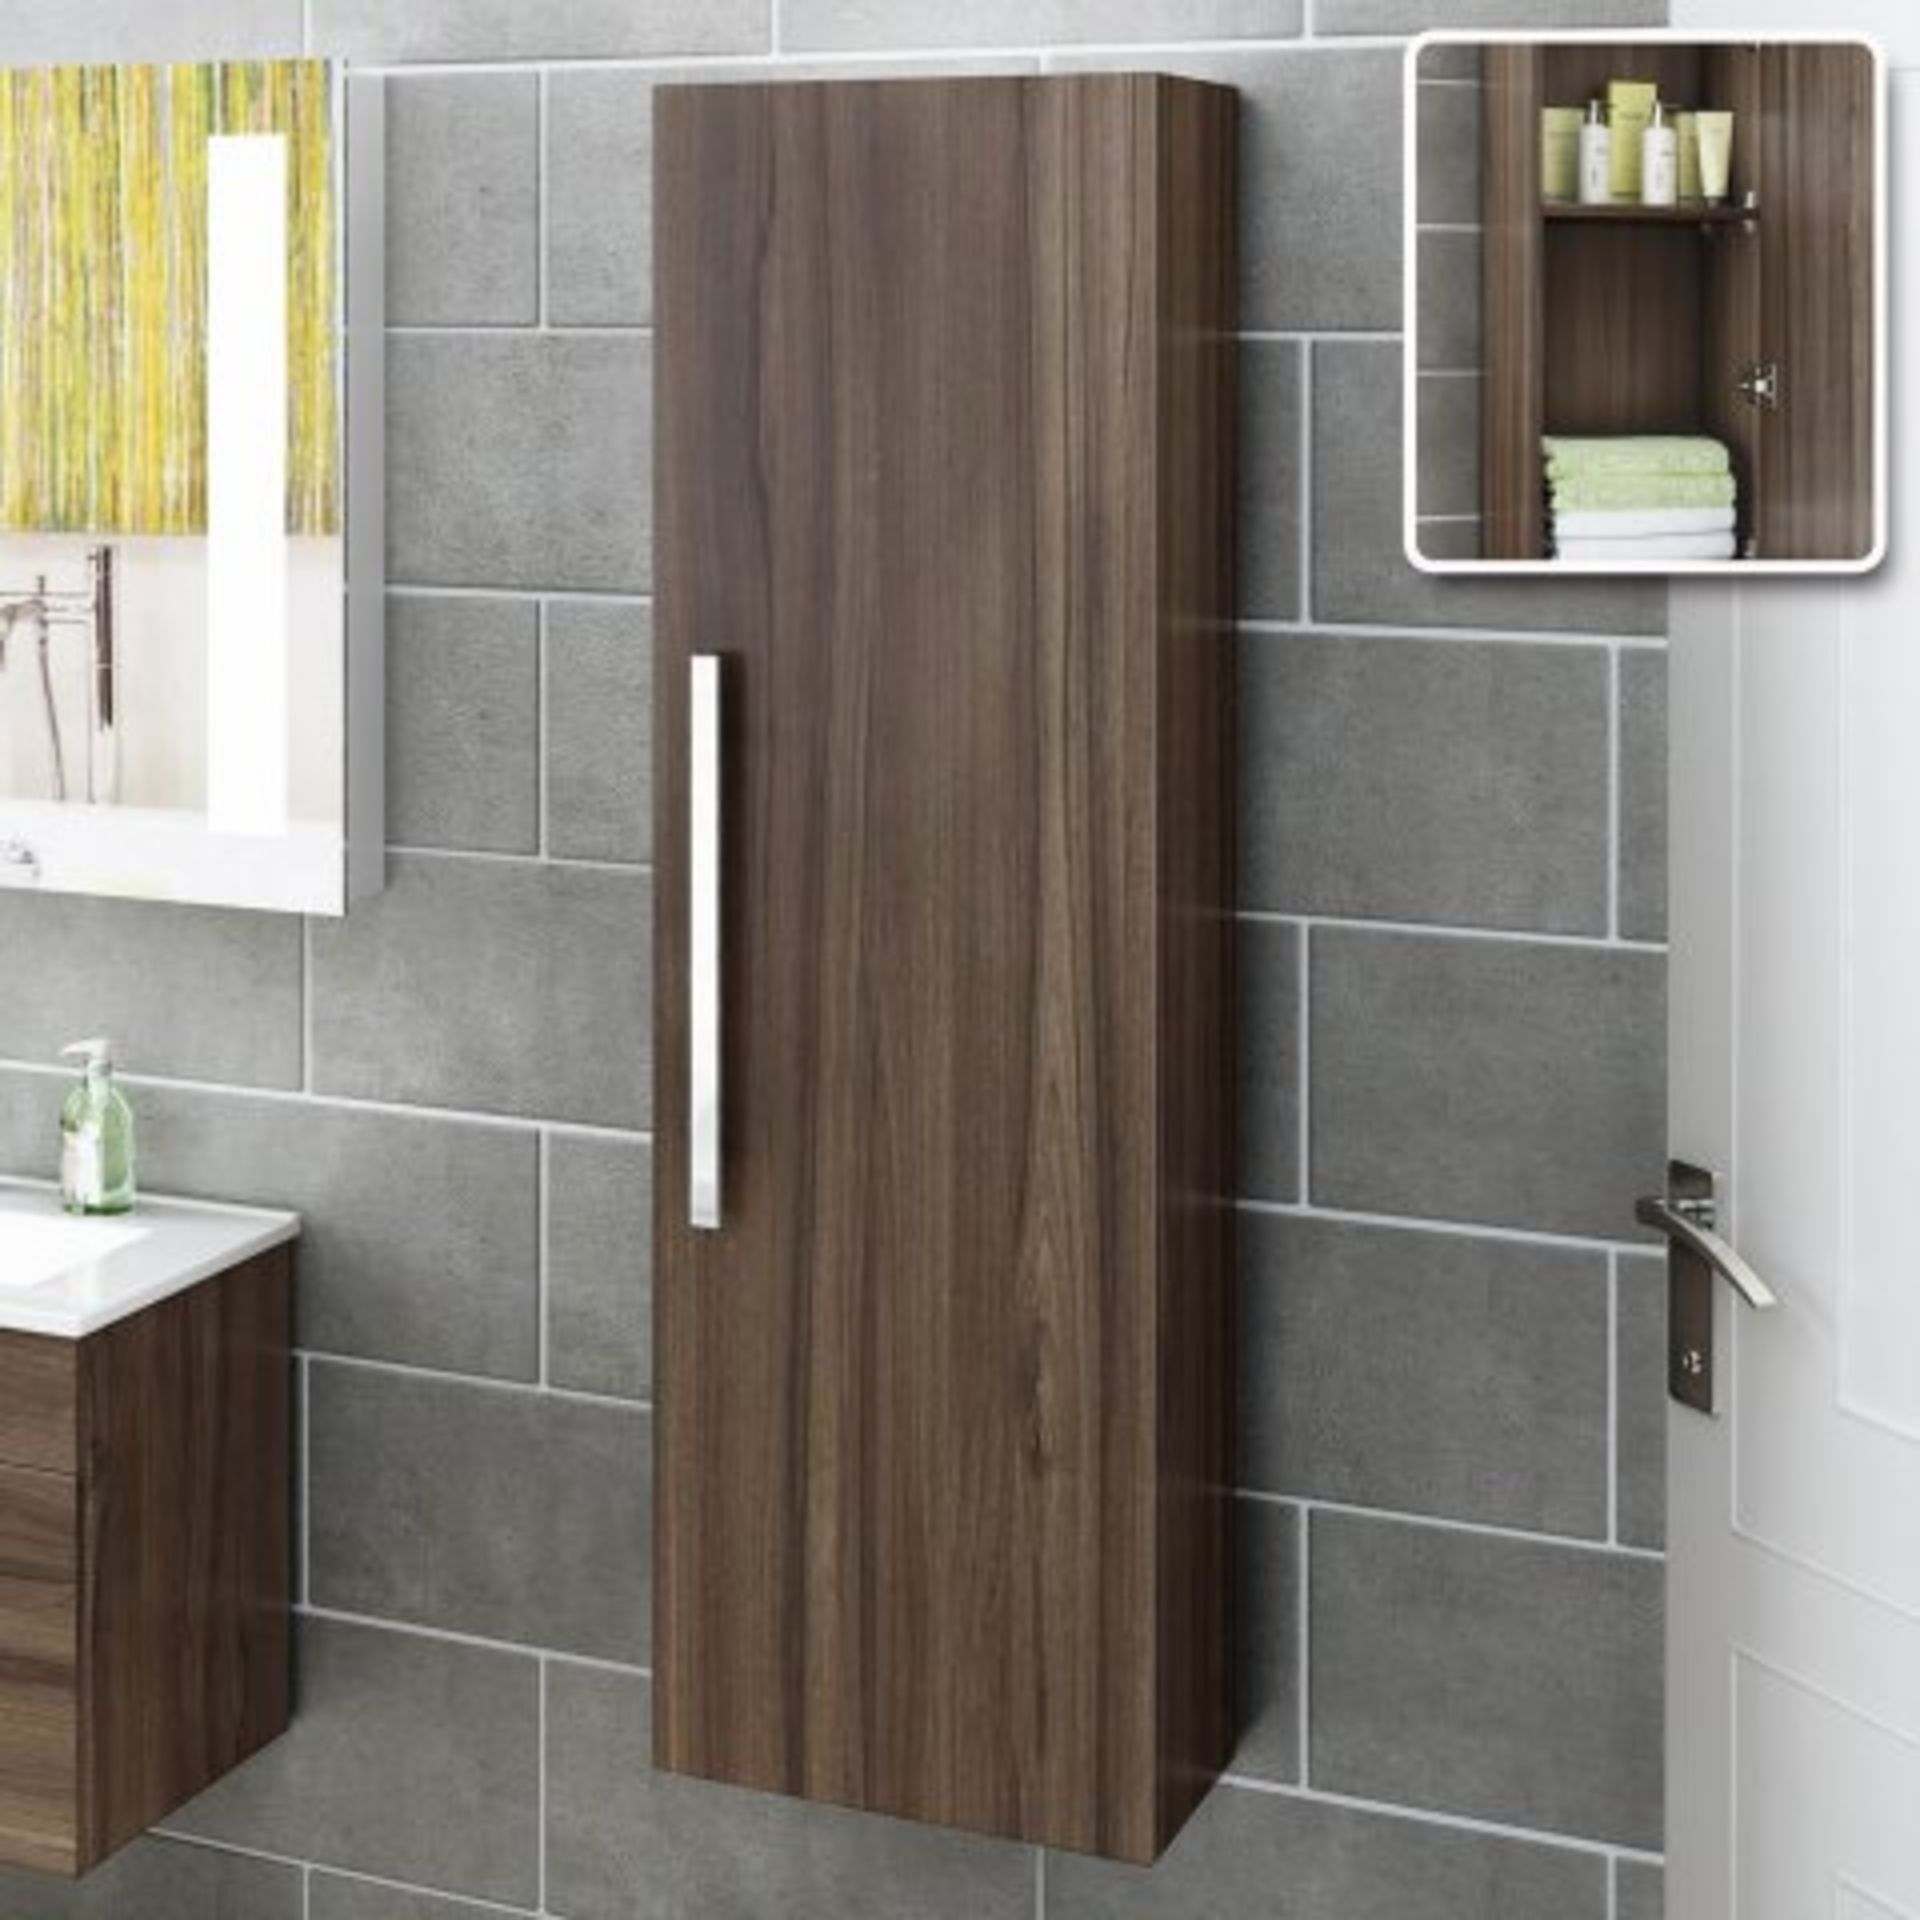 N61 - 1200mm Avon Walnut Effect Tall Storage Cabinet - Wall Hung. RRP £274.99. If space saving is